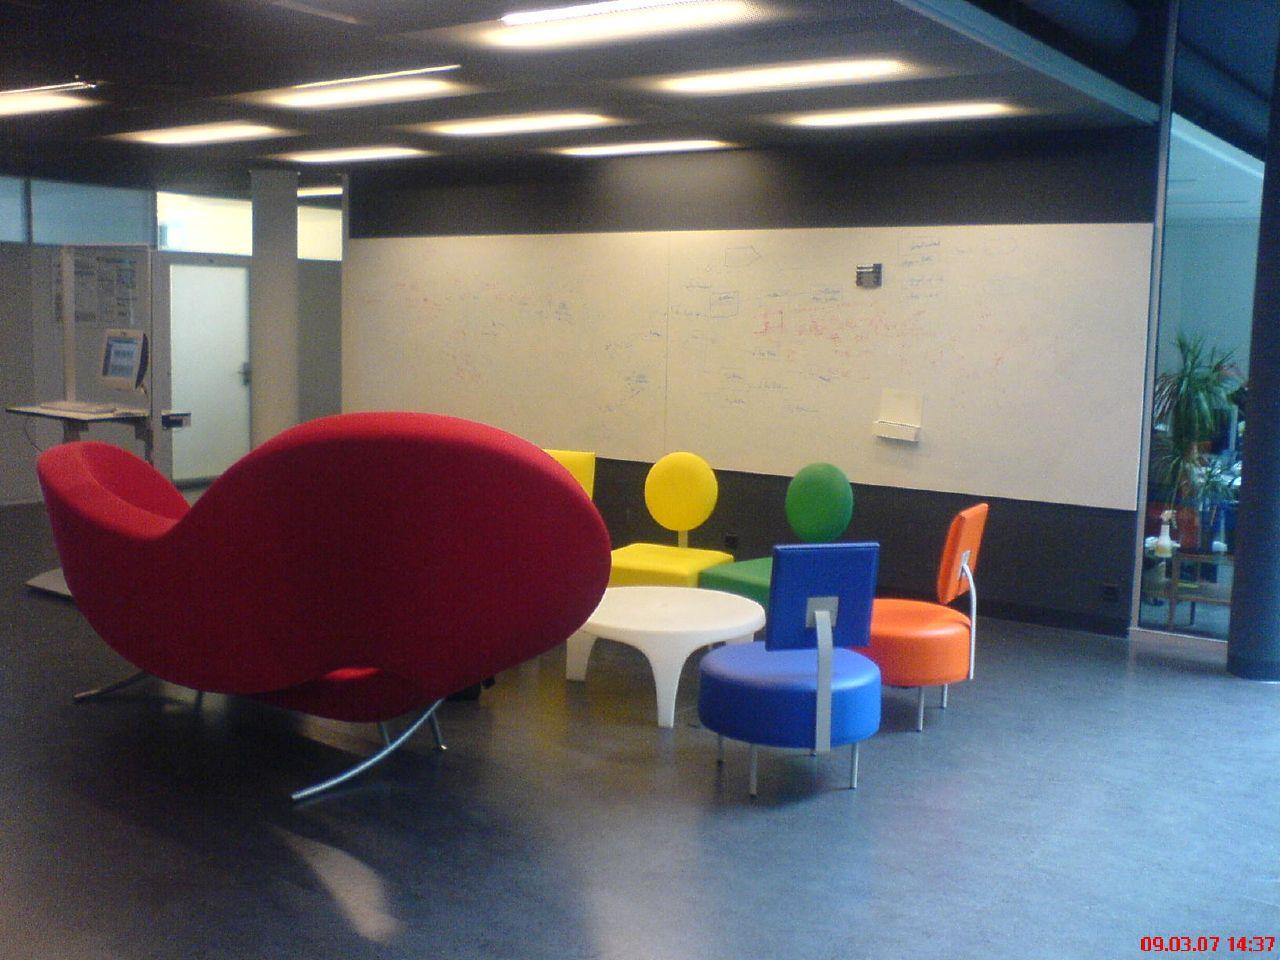 An open design space at EPFL, a research university in Lausanne, Switzerland.